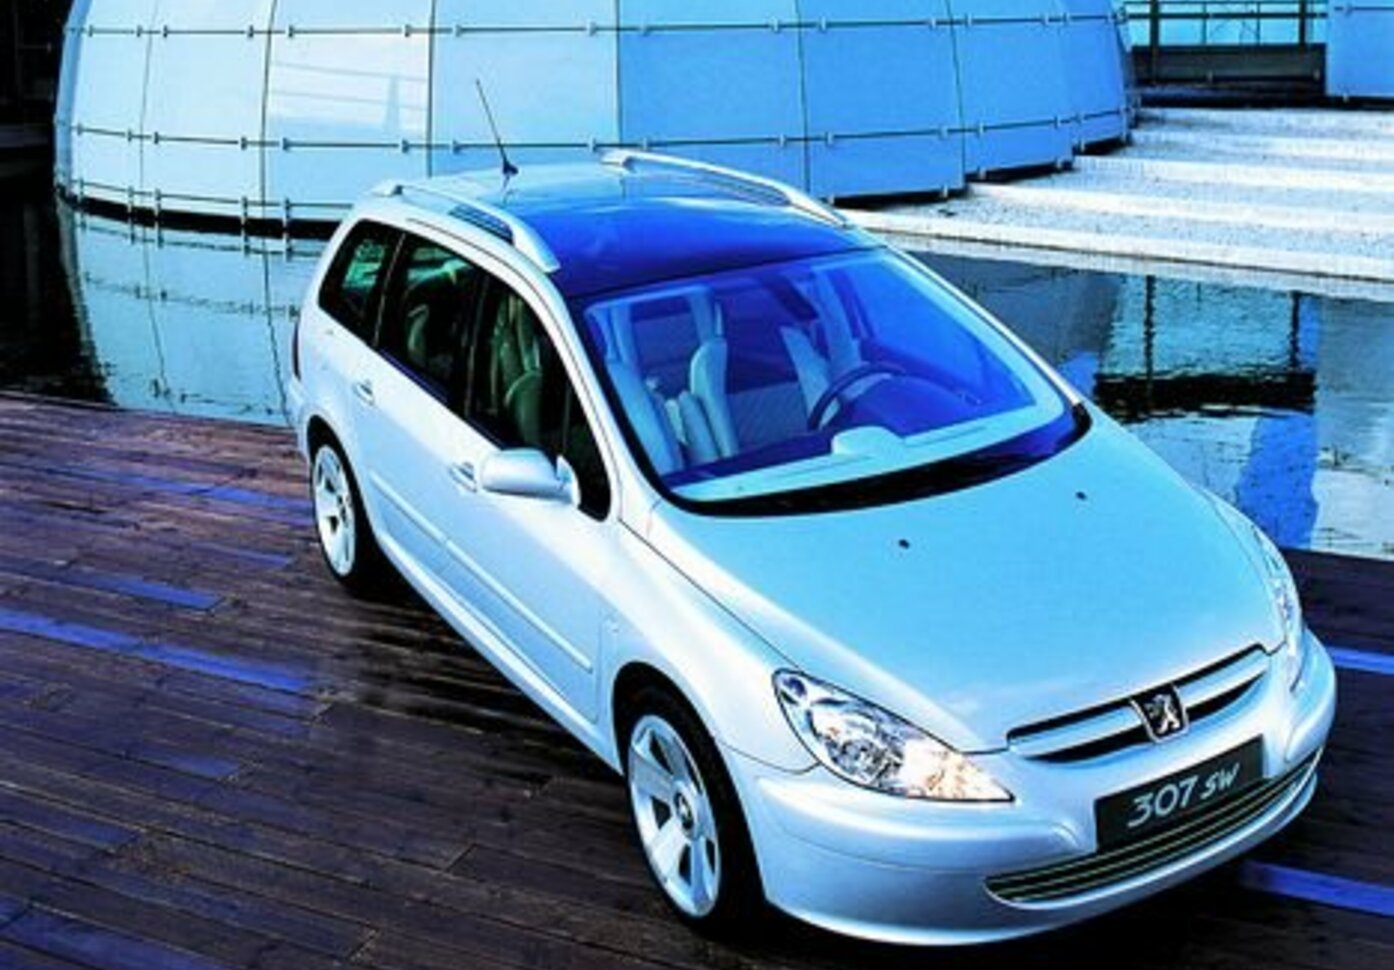 Peugeot 307 Station Wagon 2.0 HDi (136 Hp) 2005 specifications